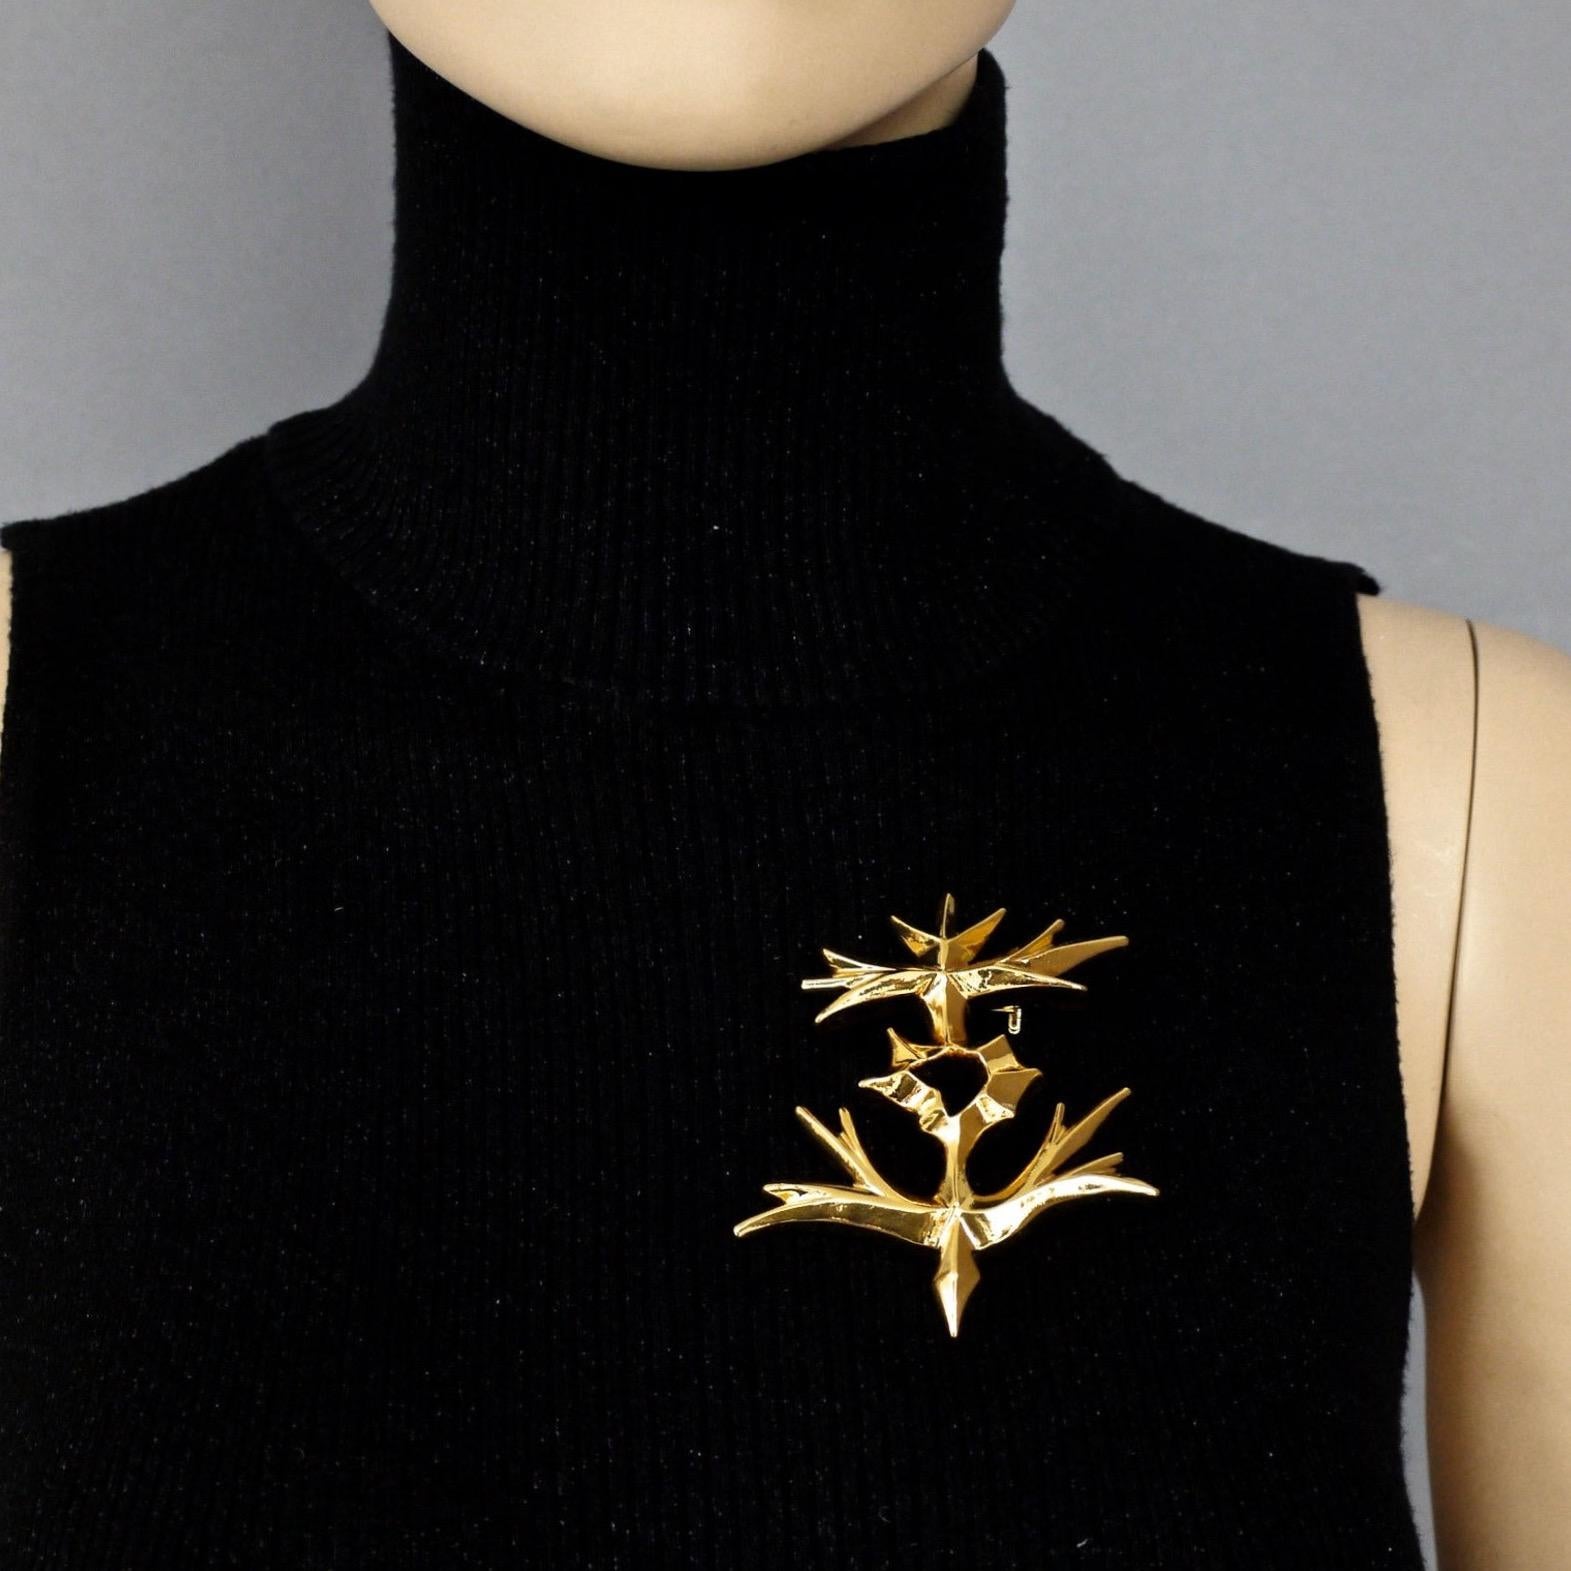 Vintage CHRISTIAN LACROIX Modernist Anchor Brooch

Measurements:
Height: 3.22 inches (8.2 cm)
Width: 2.67 inches (6.8 cm)

Features:
- 100% Authentic CHRISTIAN LACROIX.
- Modernist anchor brooch.
- Gold tone.
- Signed Christian Lacroix CL Made in